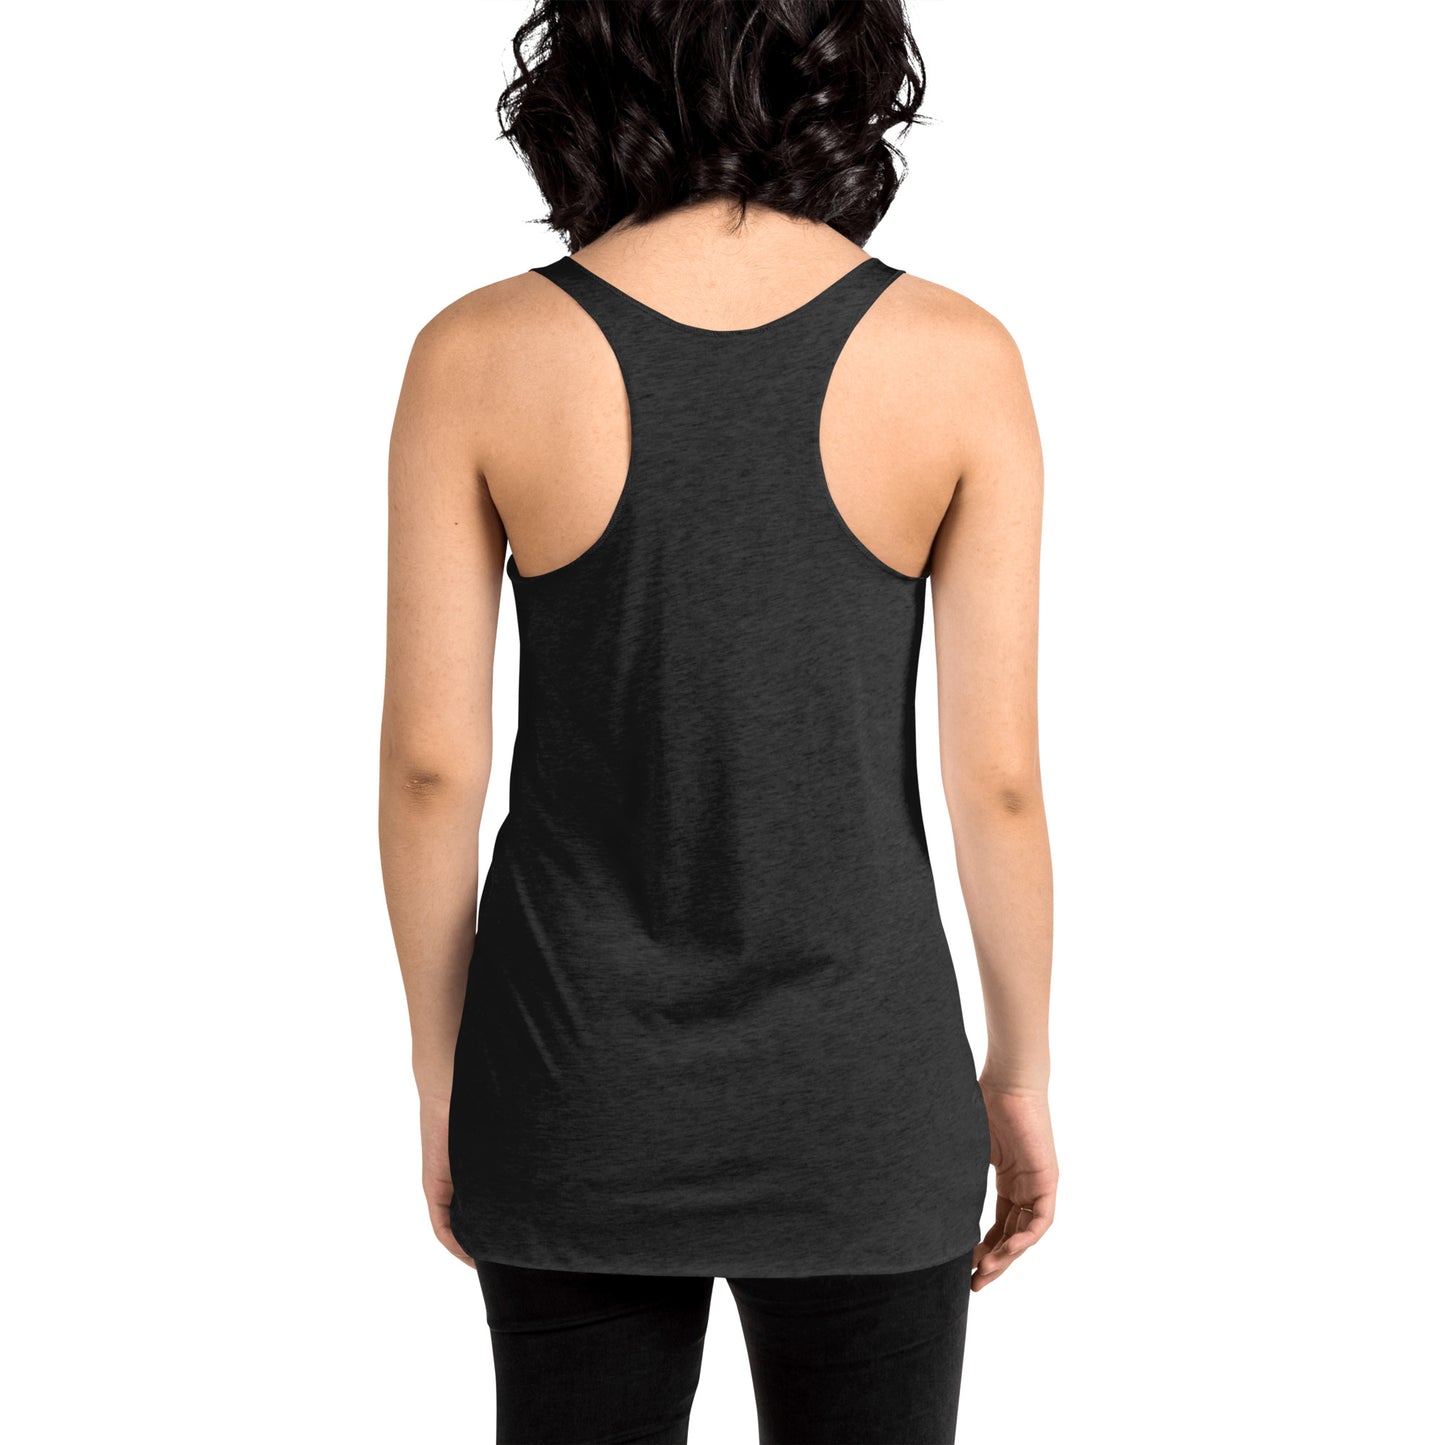 Women's Happily Ever After Racerback Tank